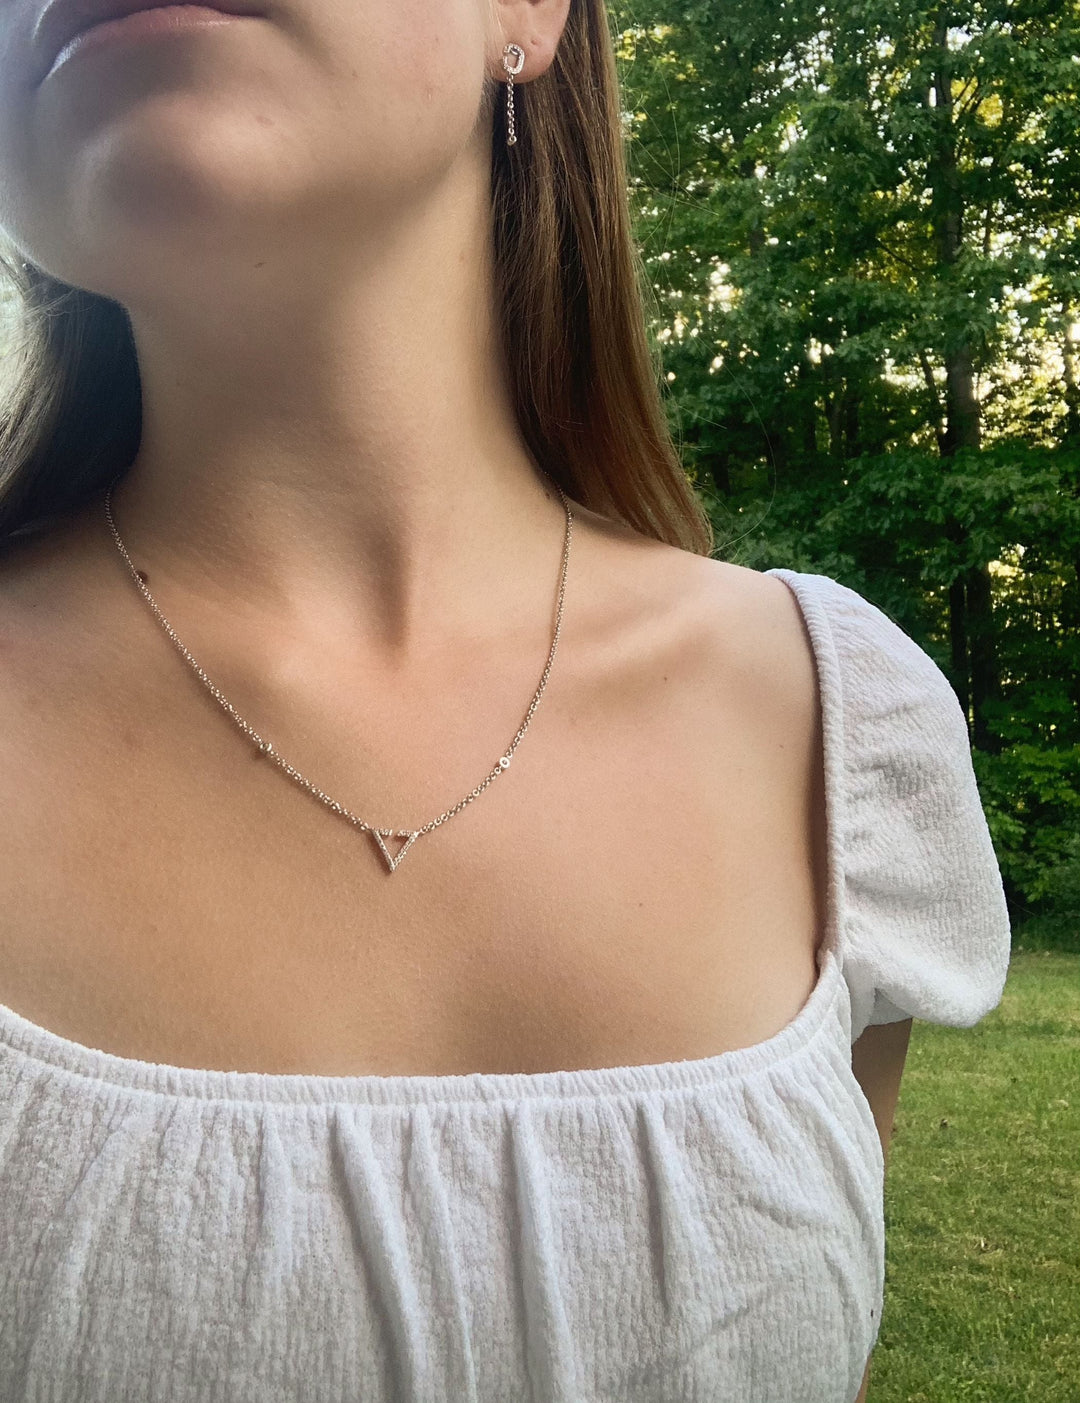 Skyline Triangle Diamond Necklace in Sterling Silver